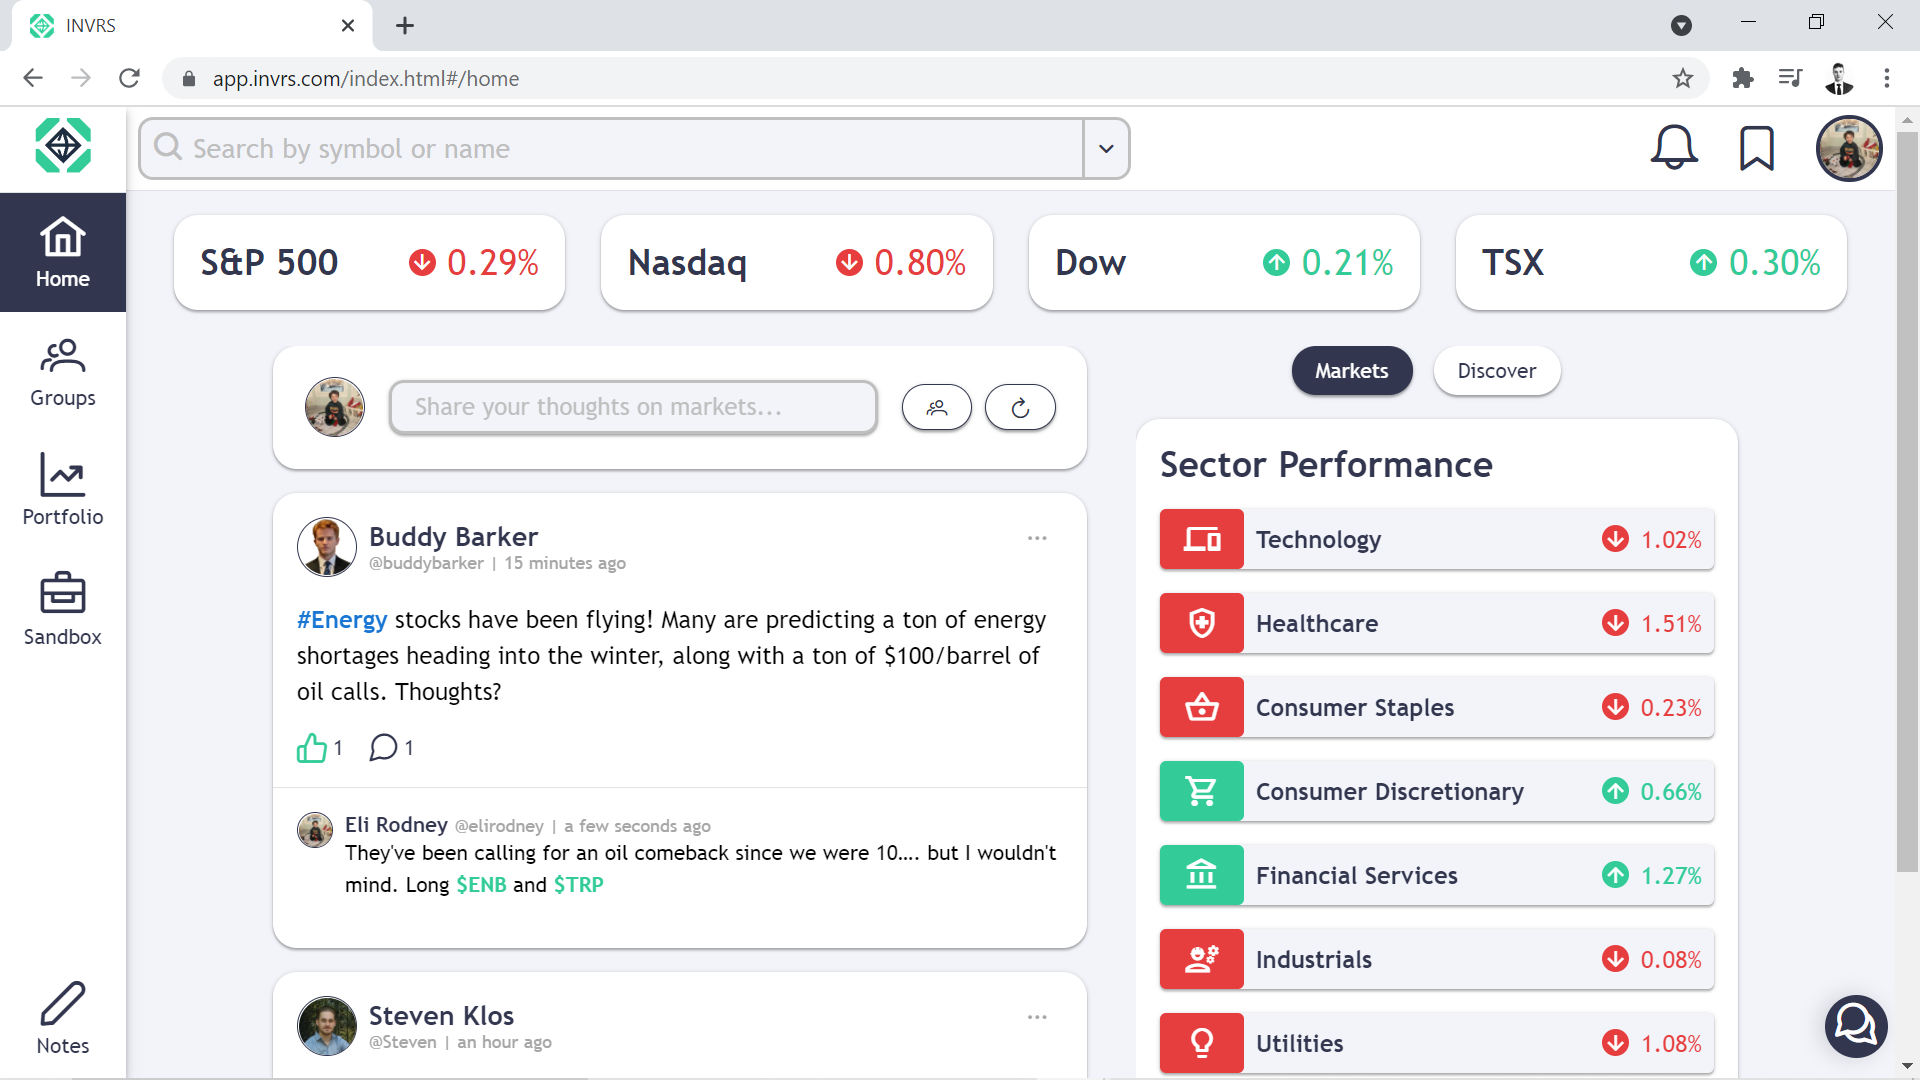 Screenshot of the INVRS home page, including the social feed and stock market data